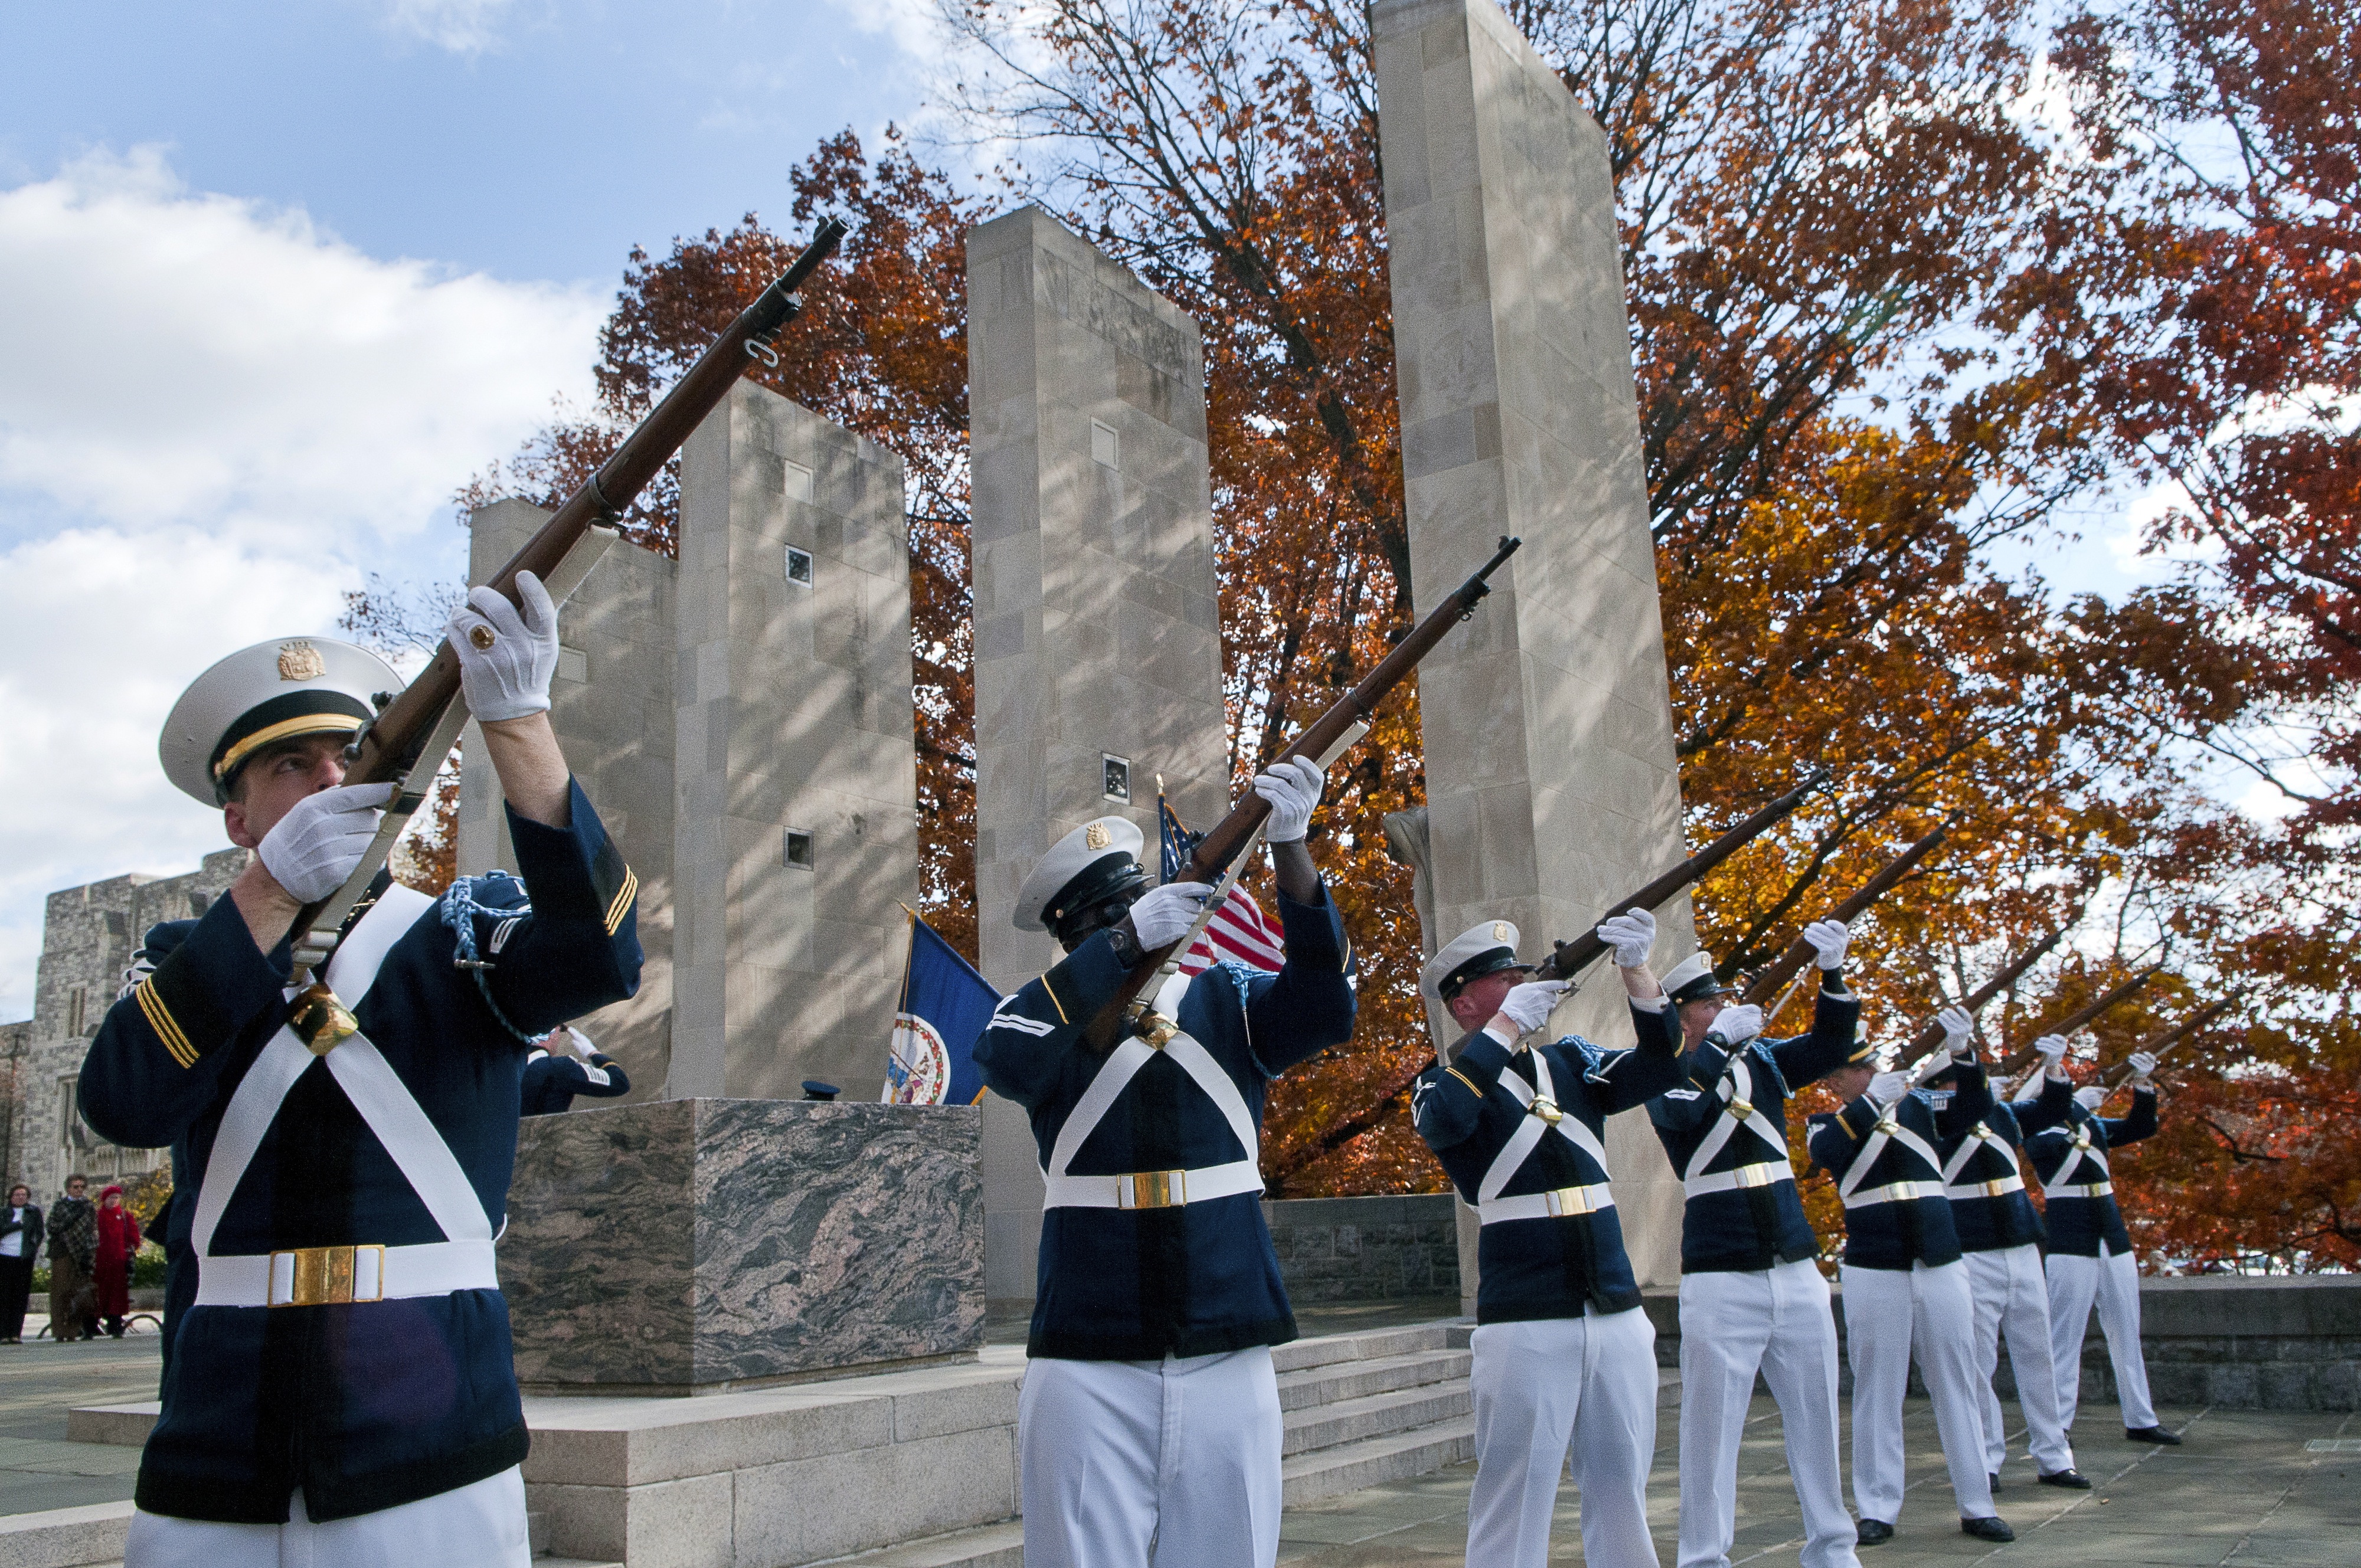 The Gregory Guard, the Virginia Tech Corps of Cadets rifle drill team, performing a rifle salute at the 2011 Veterans Day remembrance ceremony at the War Memorial.